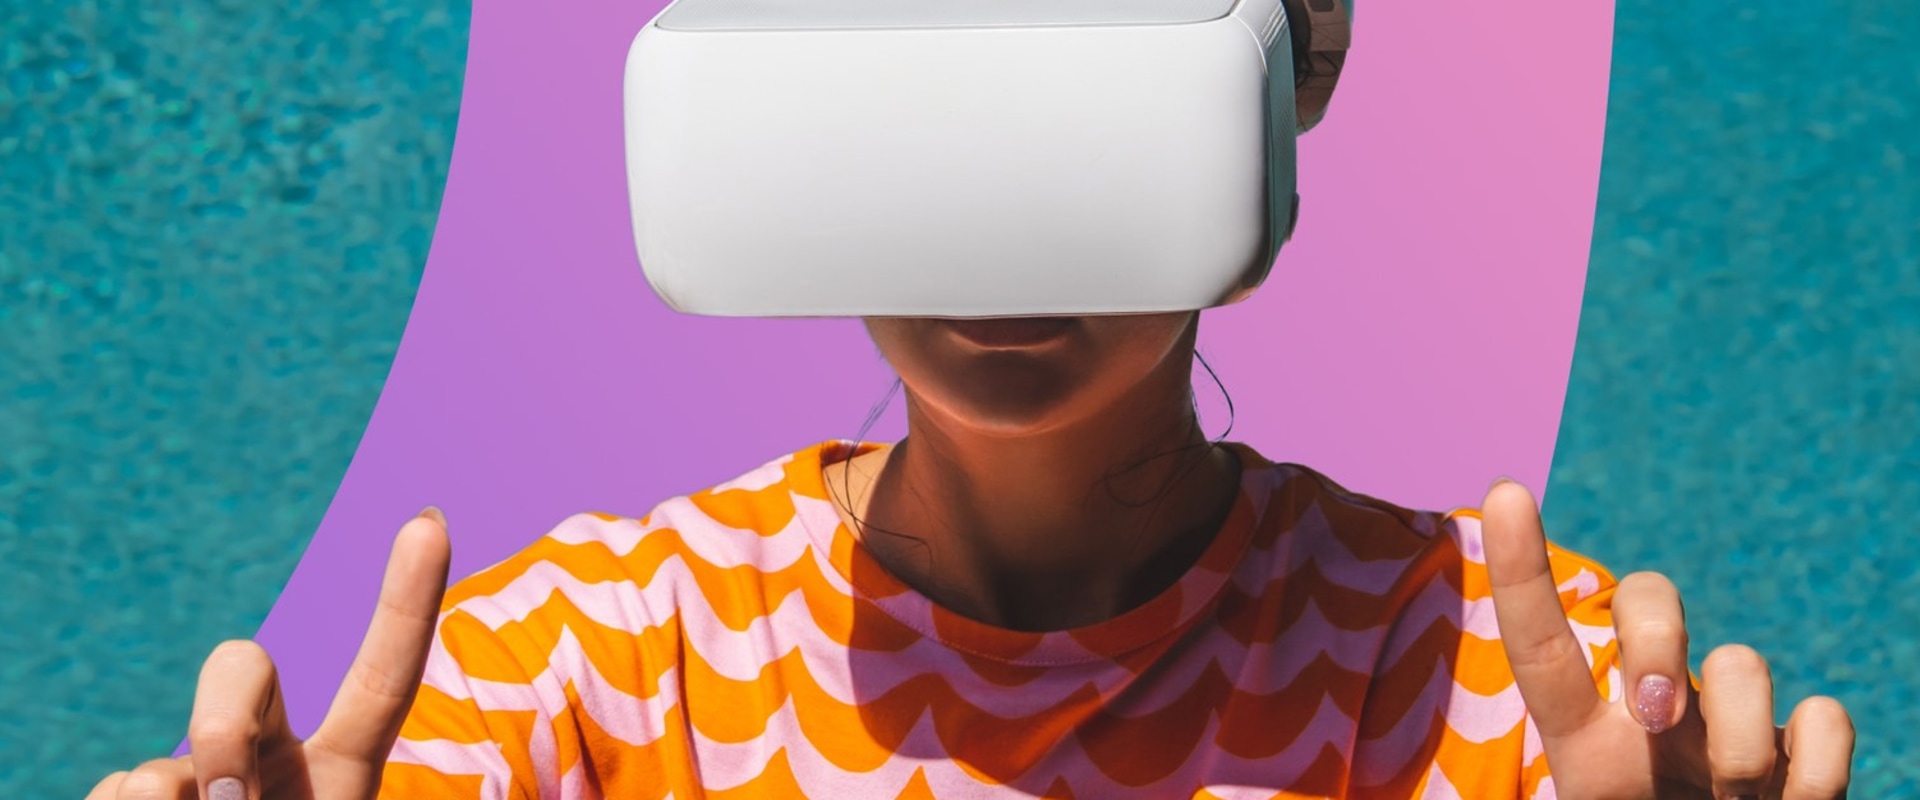 How can i use virtual reality (vr) and augmented reality (ar) in my digital campaigns?